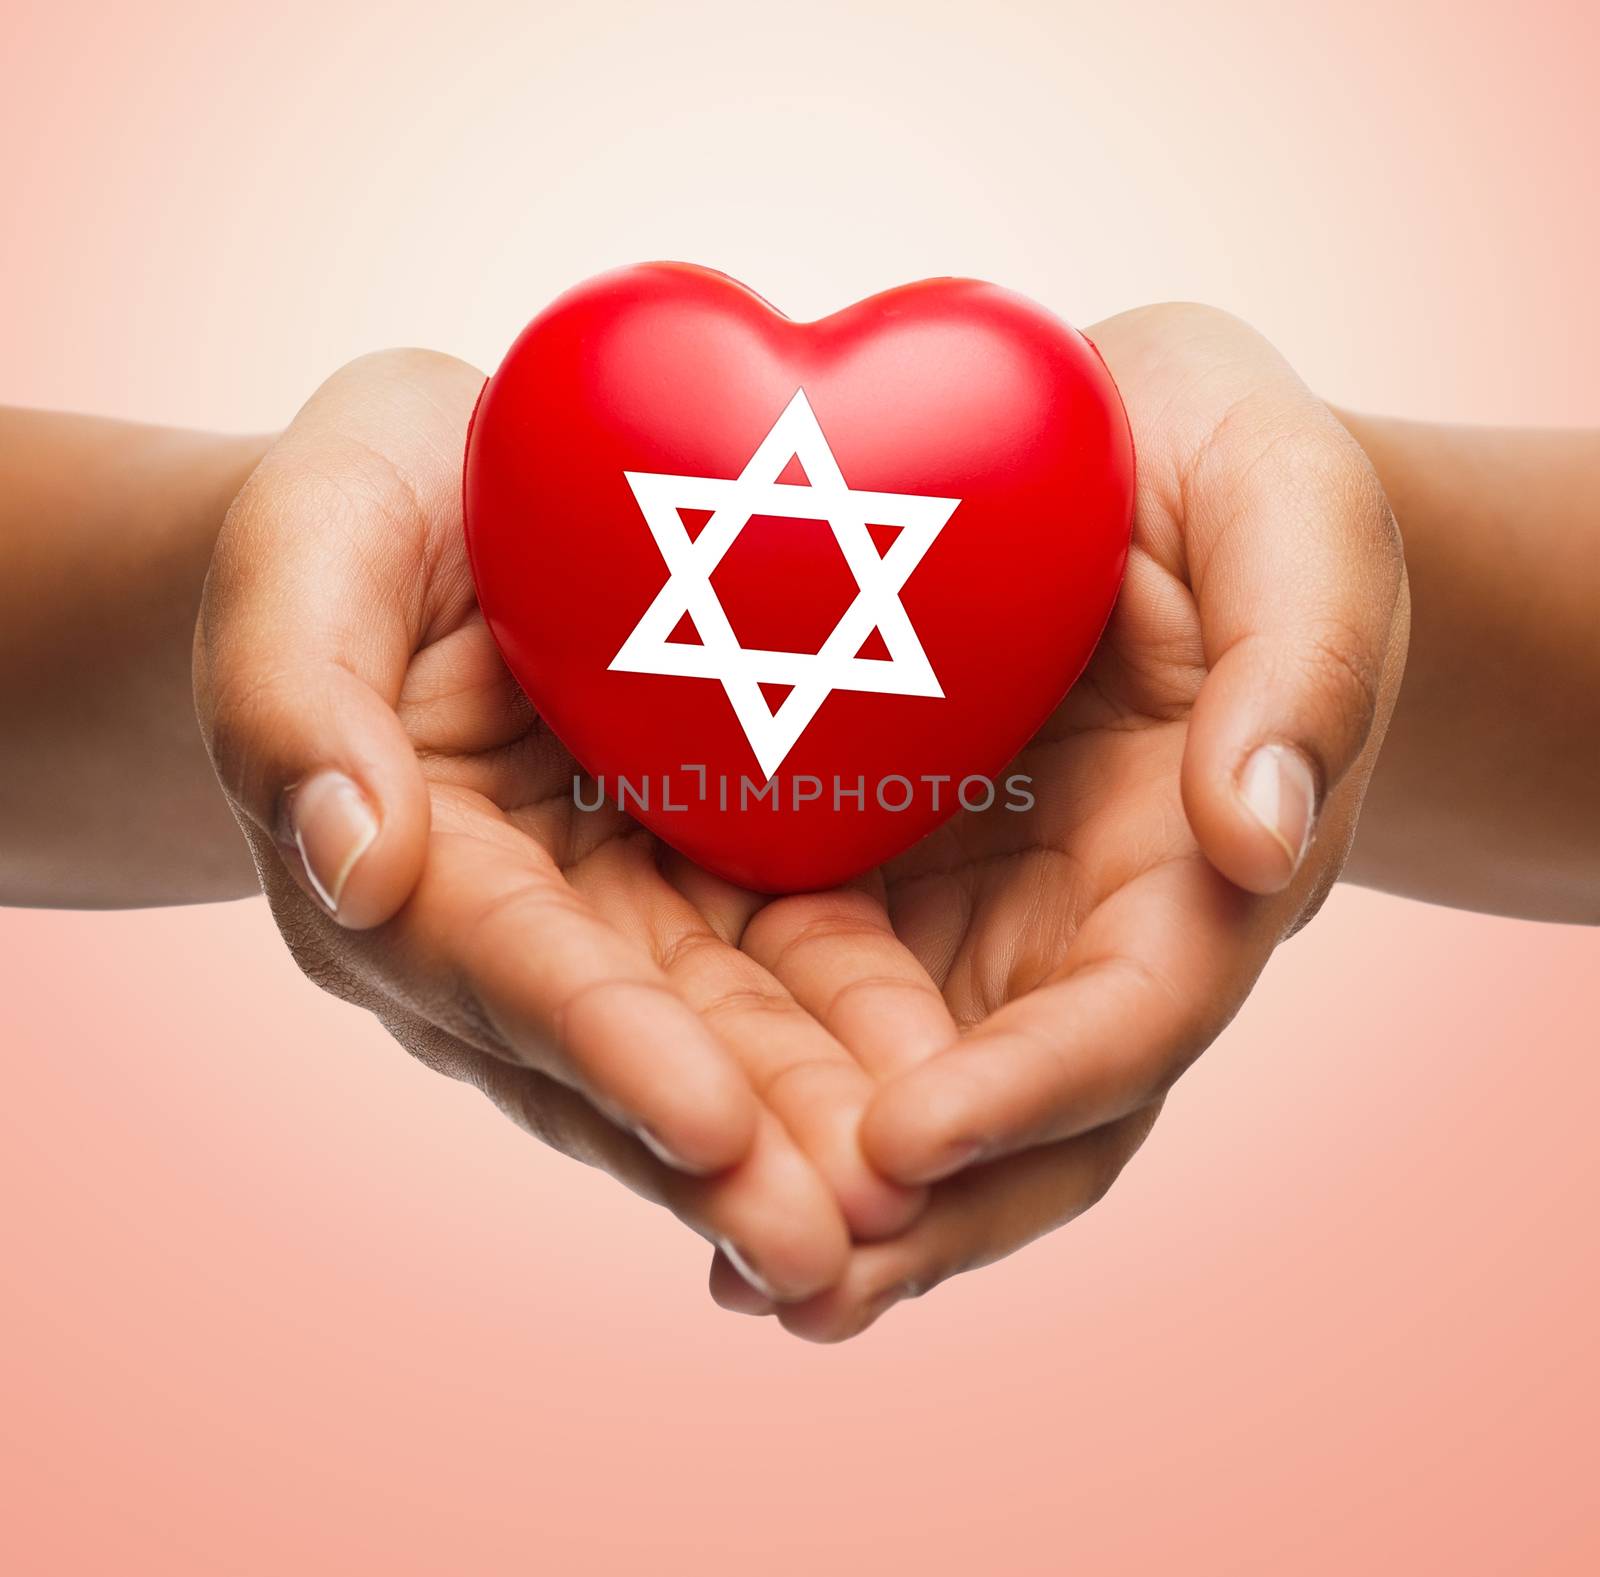 religion, christianity, jewish community and charity concept - close up of female hands holding red heart with star of david symbol over beige background